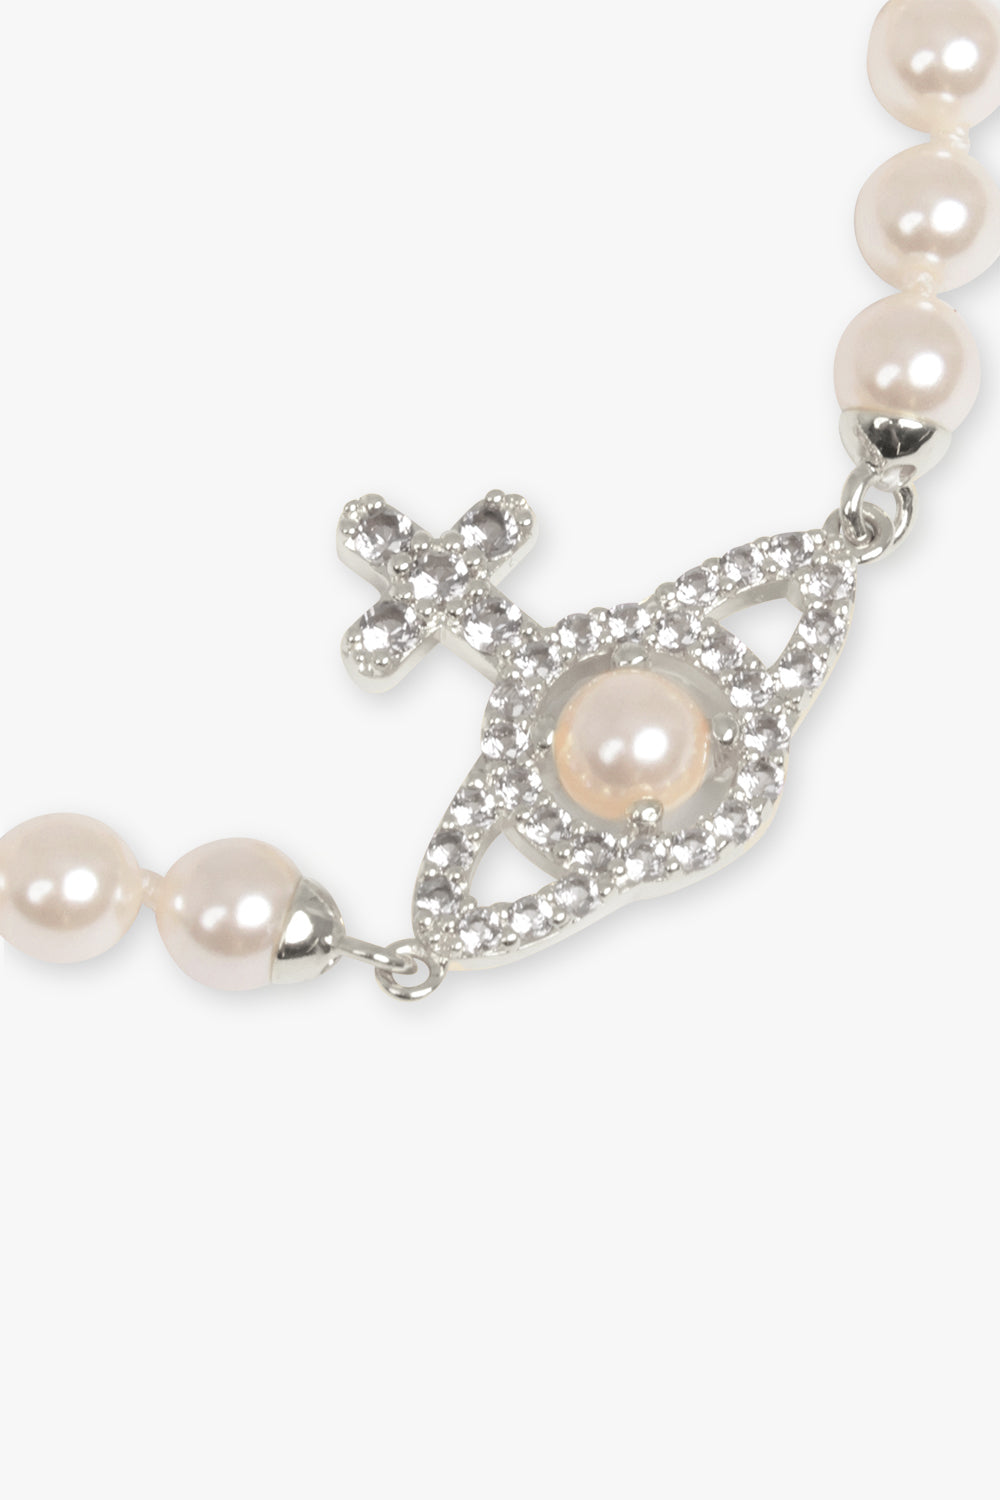 VIVIENNE WESTWOOD JEWELLRY SILVER / SILVER OLYMPIA PEARL BRACELET | CREAM ROSE PEARL/SILVER